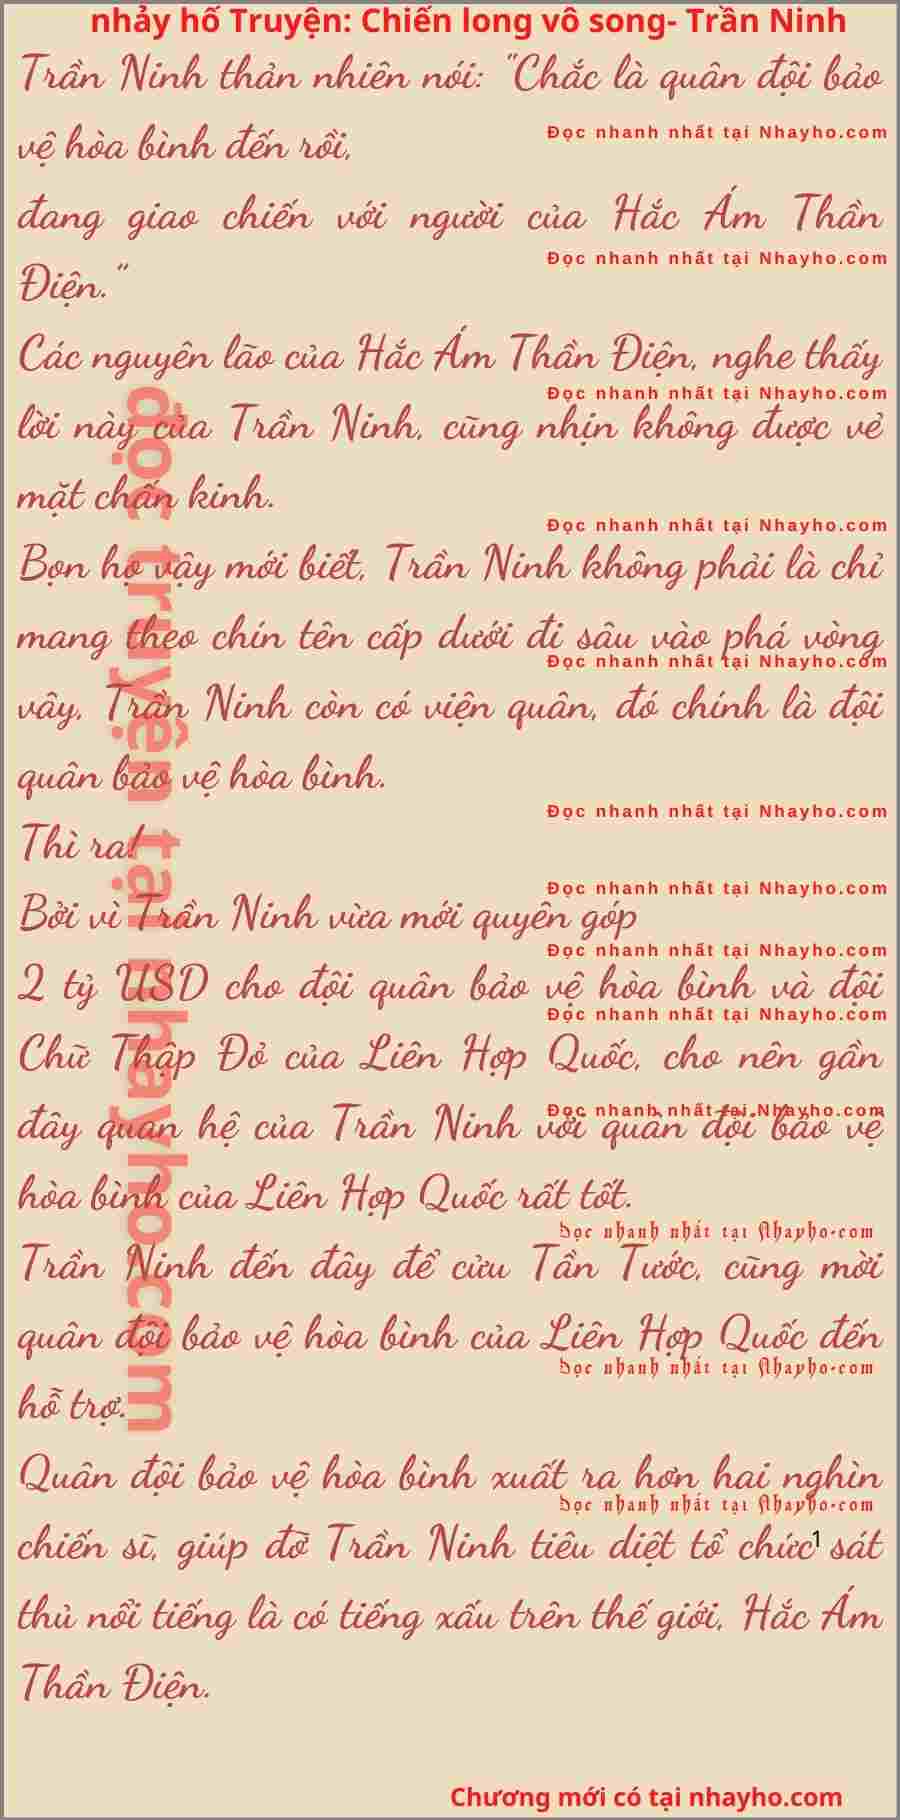 chien-long-vo-song-791-0